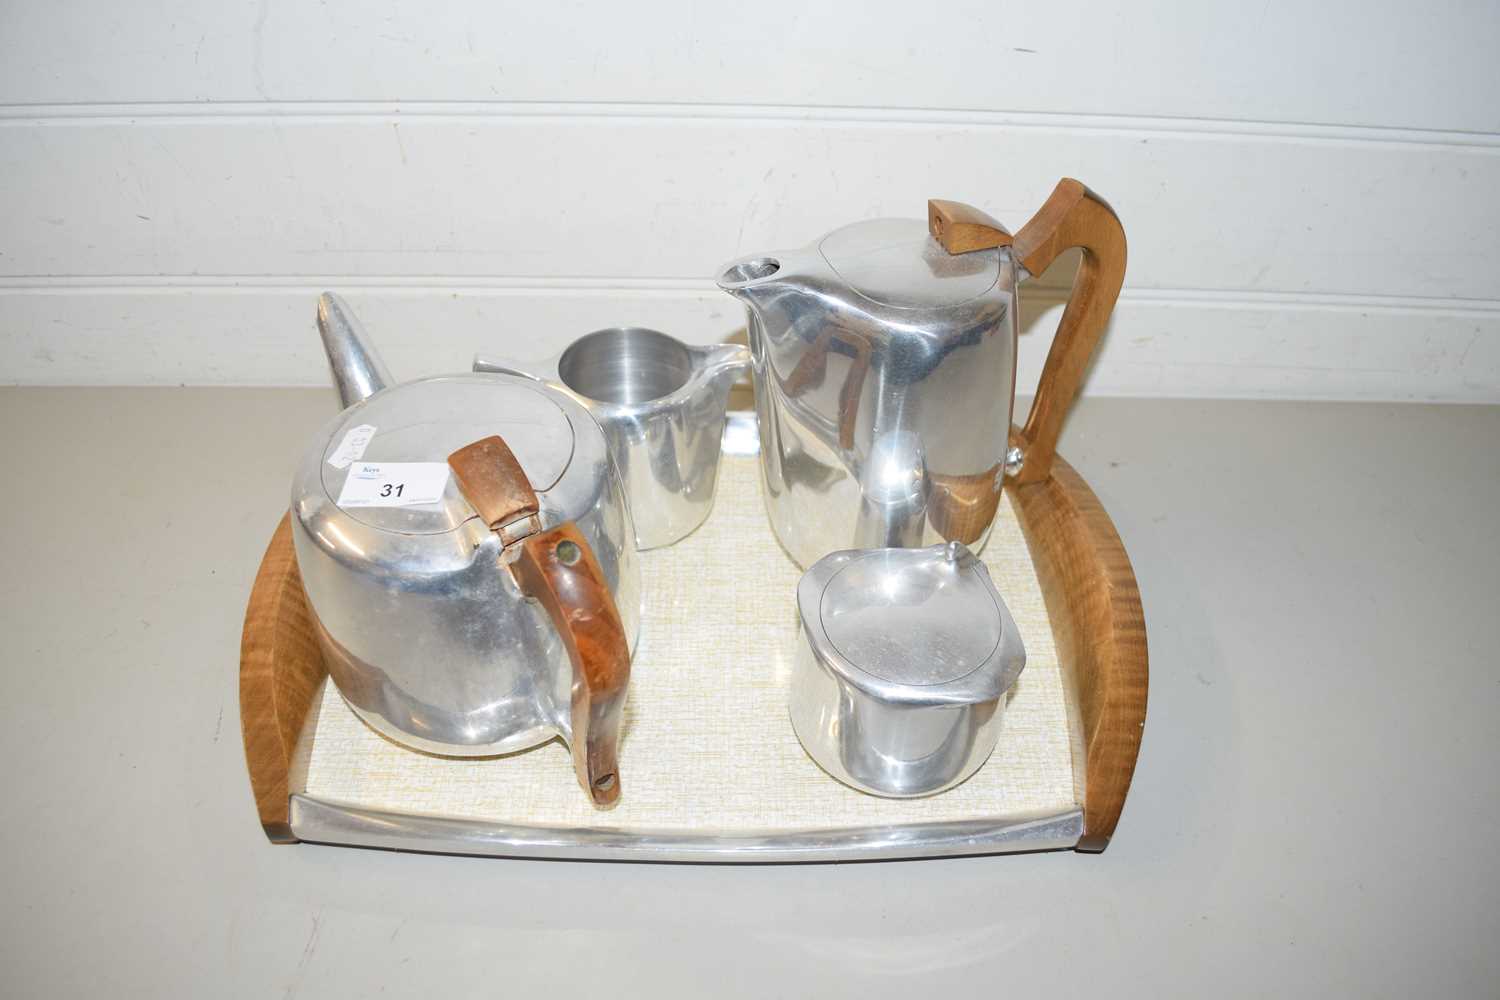 PICQUOT WARE FOUR PIECE TEA SET WITH TRAY